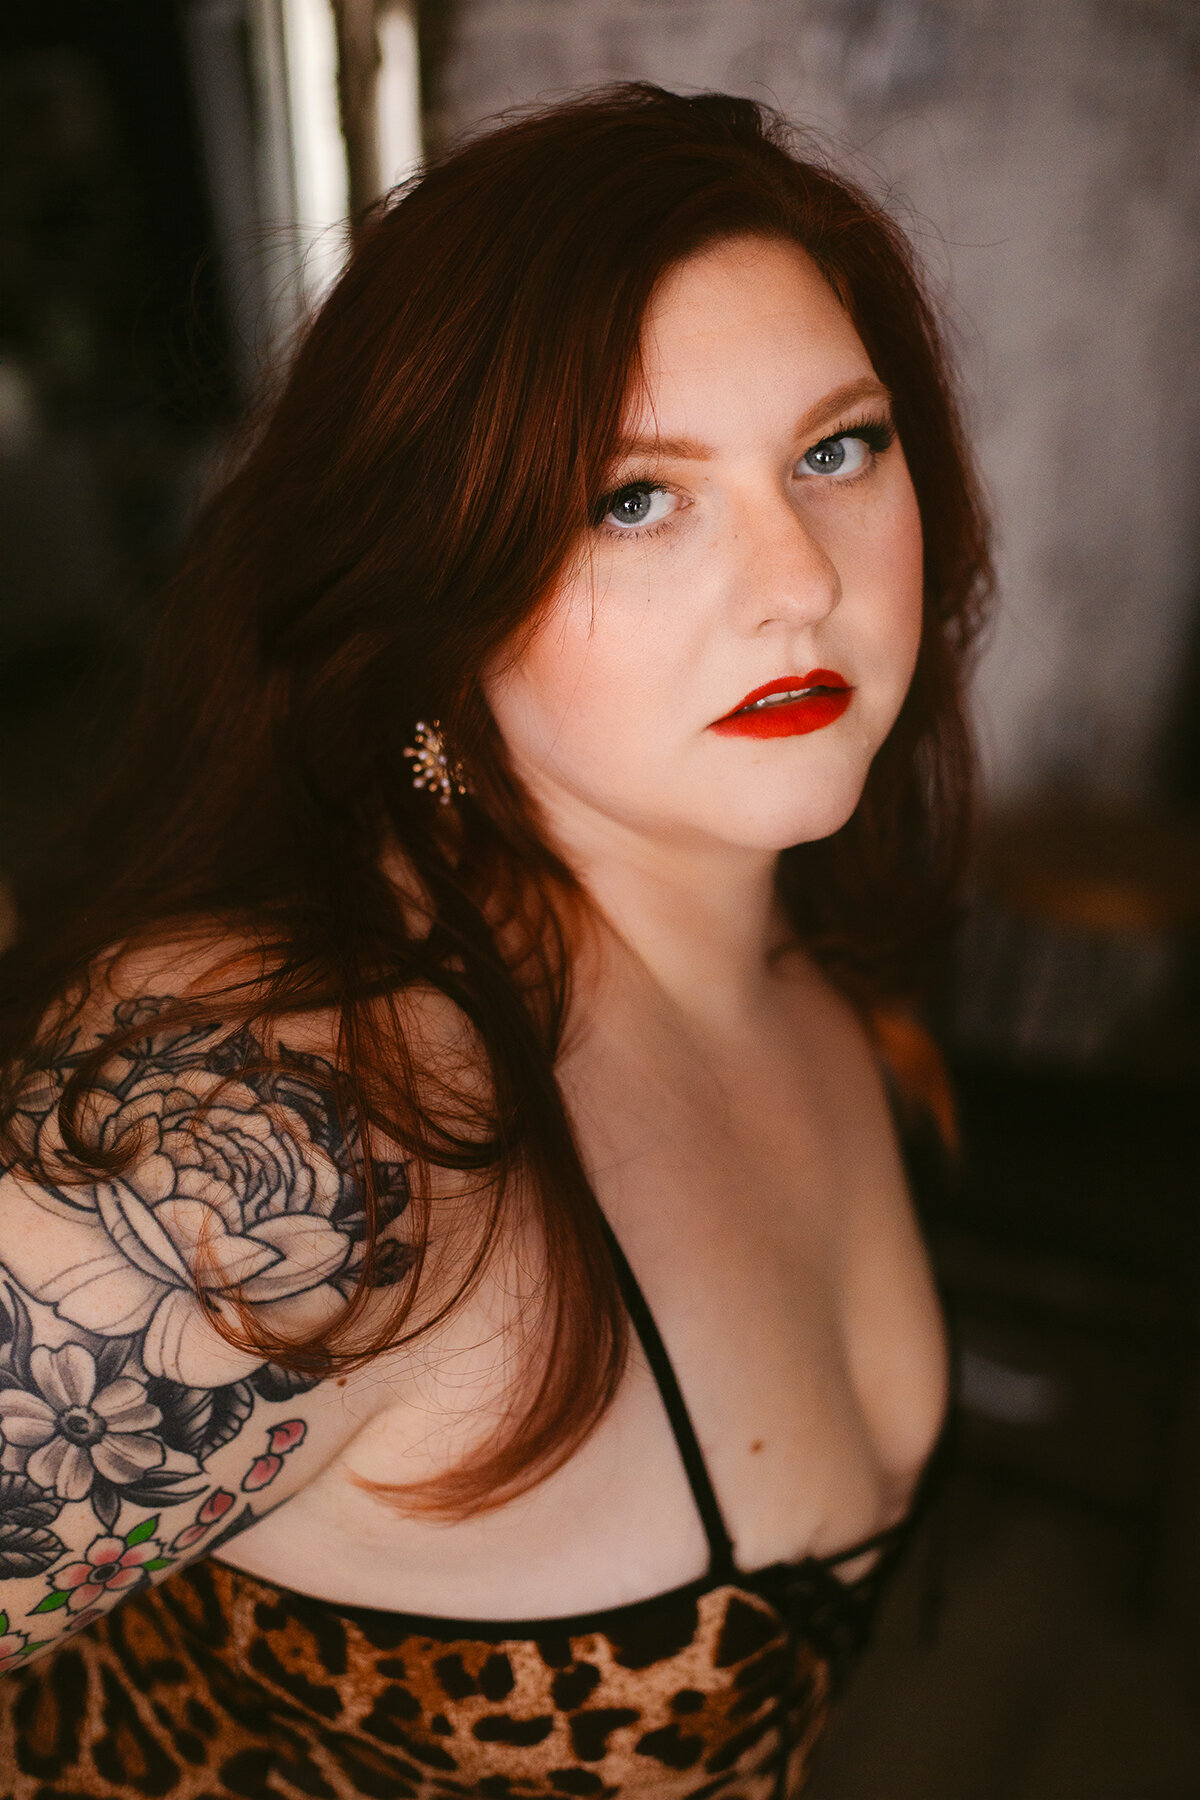 A woman in a cheetah print top with red hair and red lipstick looks seductively at the camera at a Bentonville boudoir photoshoot.